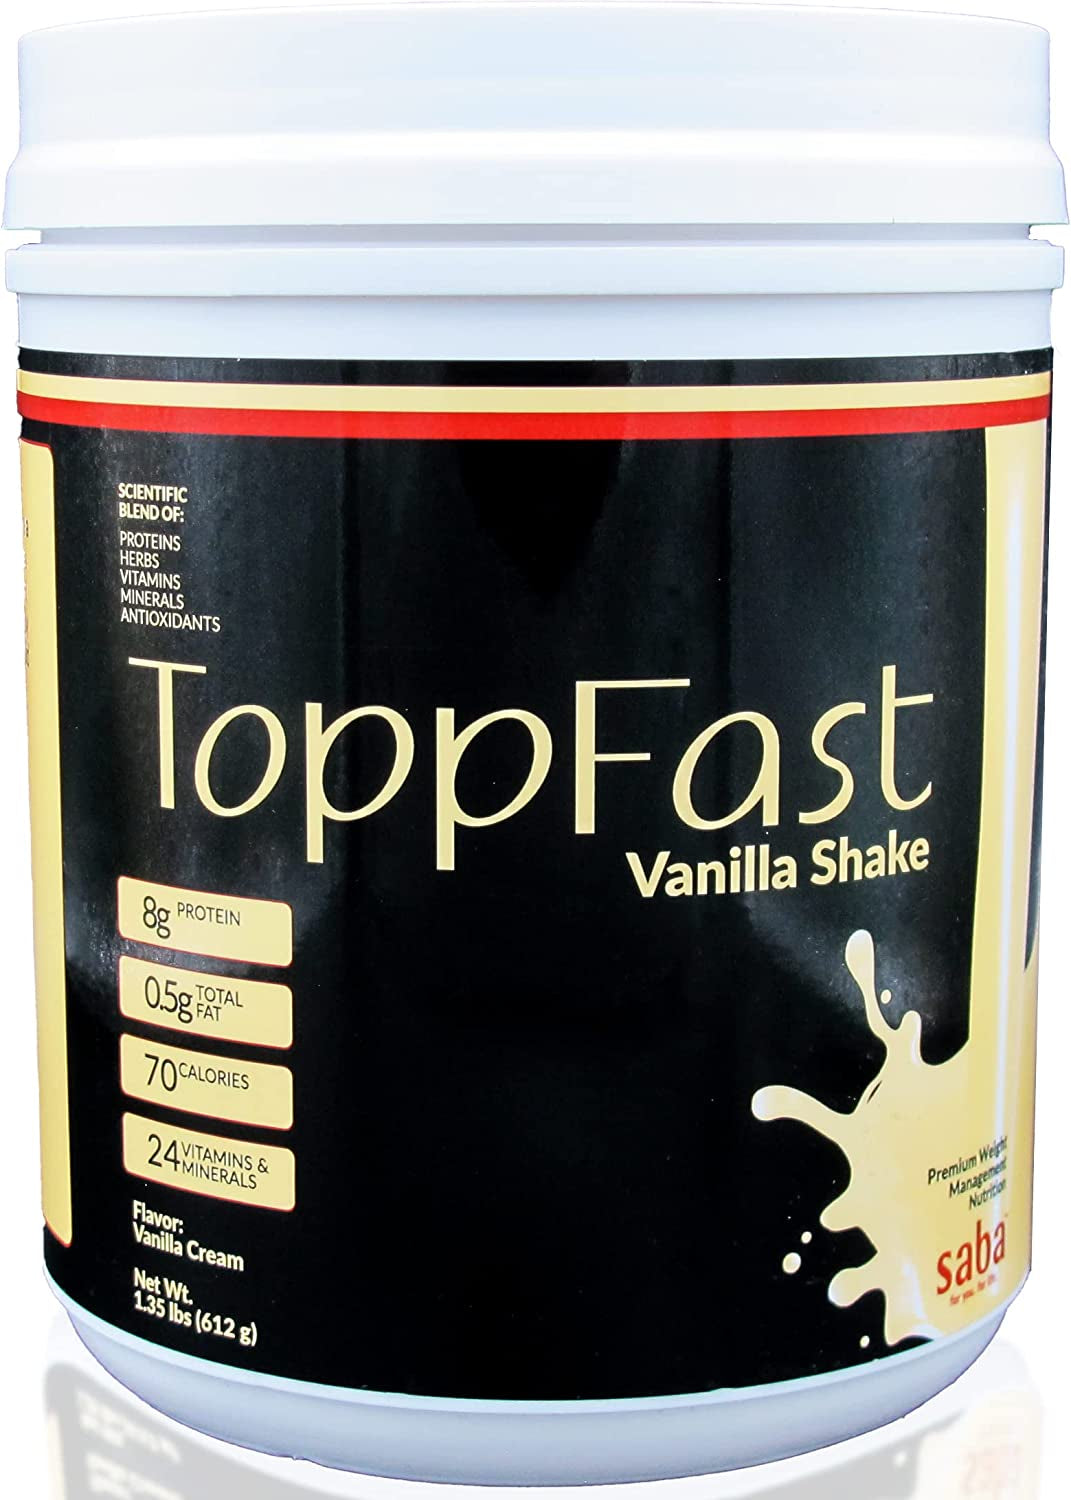 Saba Toppfast™-Weight Management Nutrition -Scientific Blend of Proteins, Herbs, Vitamins, Minerals, & Antioxidants in a Low-Fat, Low-Carb Formula (Vanilla)